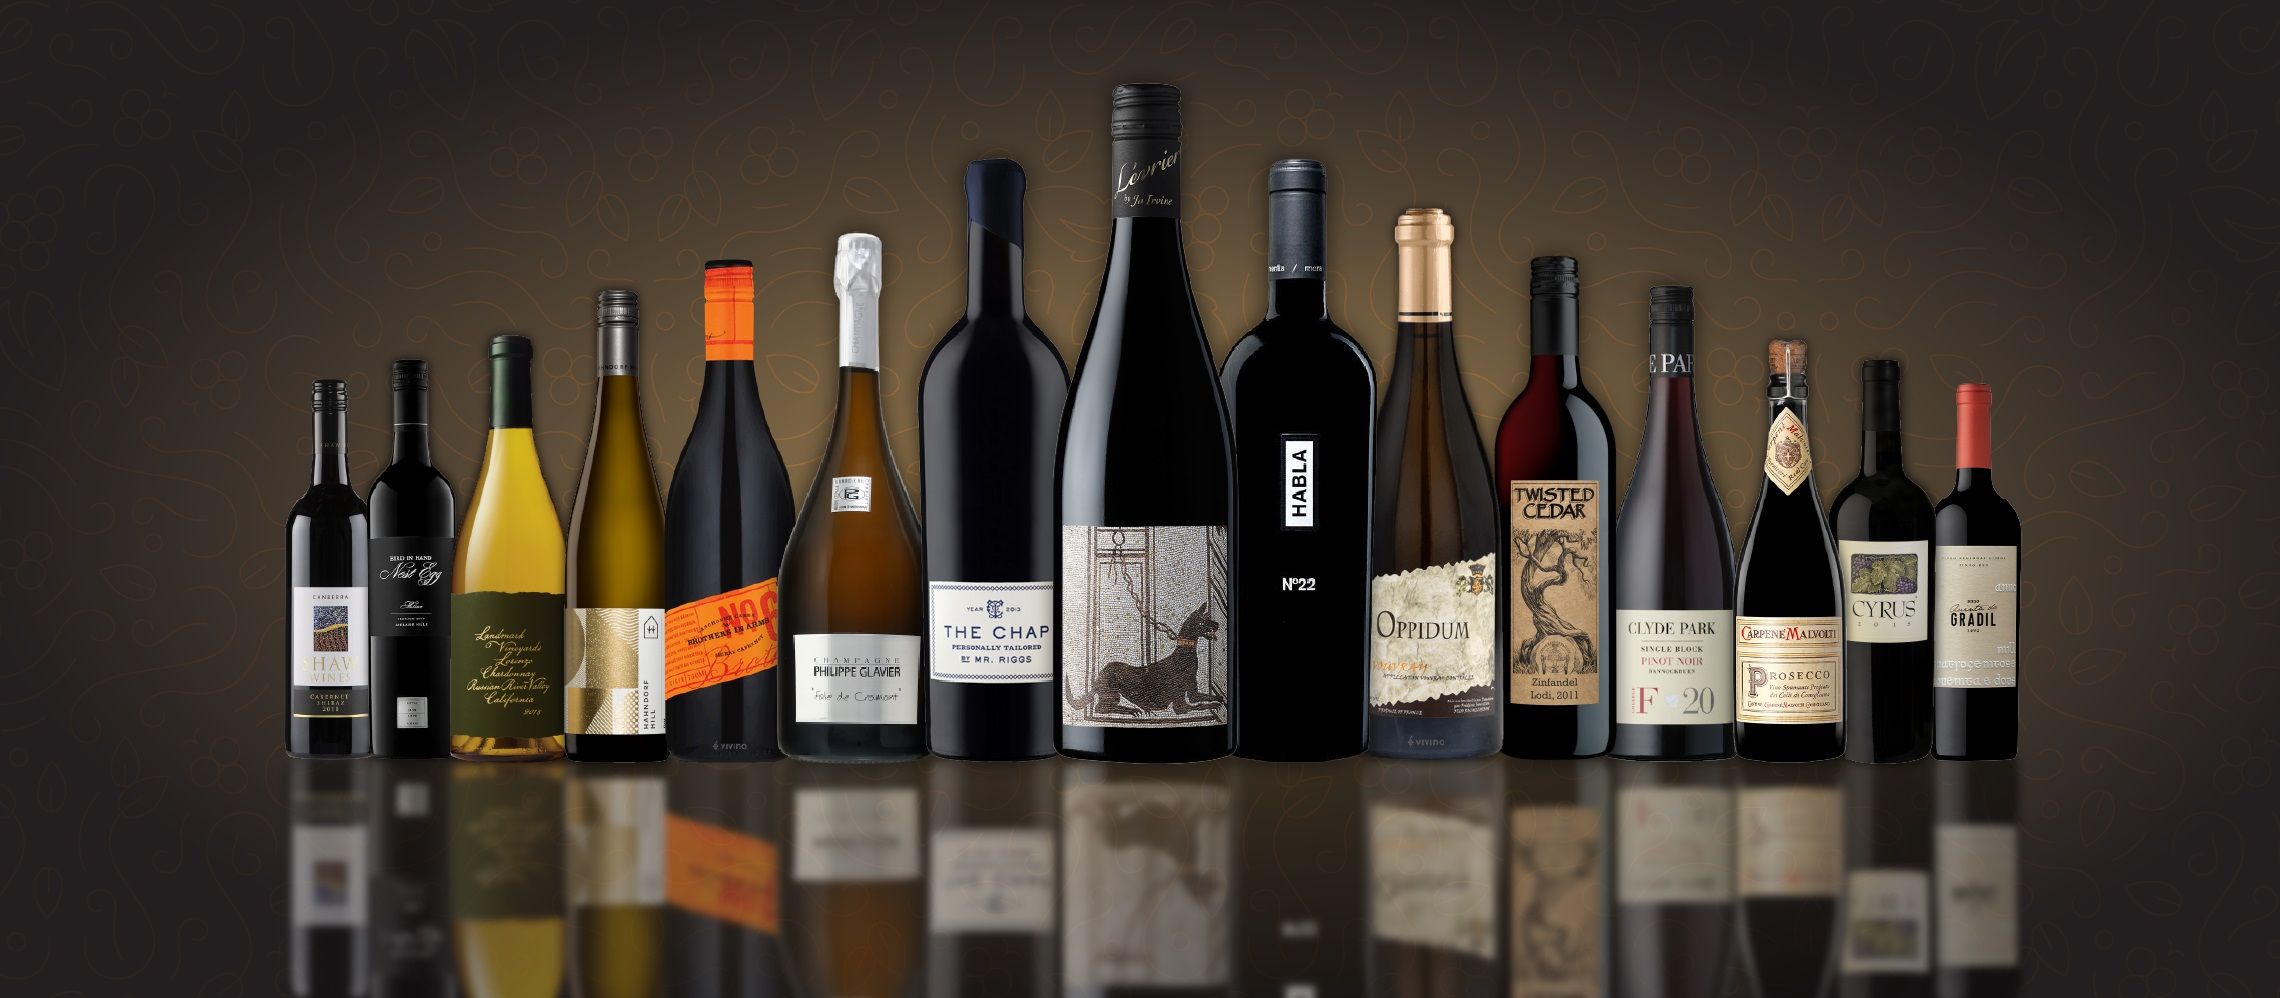 Photo for: Top 20 Outstanding Wines of London Wine Competition 2021